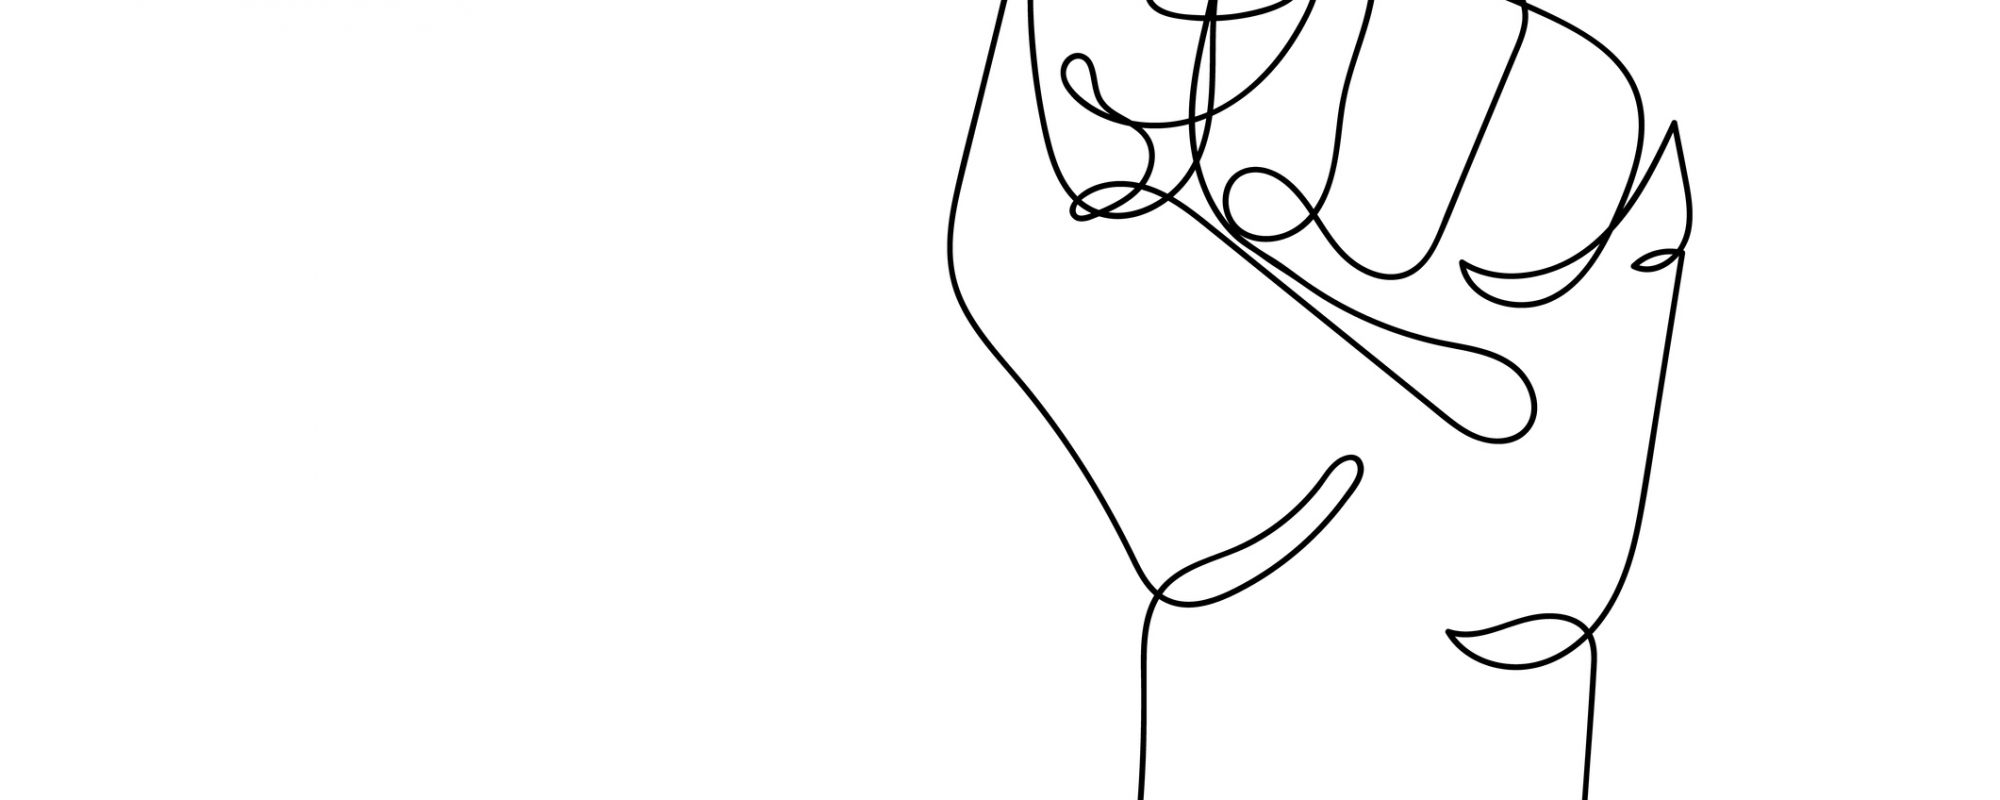 Continuous line drawing of strong fist raised up. Human arm with clenched fingers, one line drawing vector illustration. Concept of protest, revolution, freedom, equality, fight for human rights.